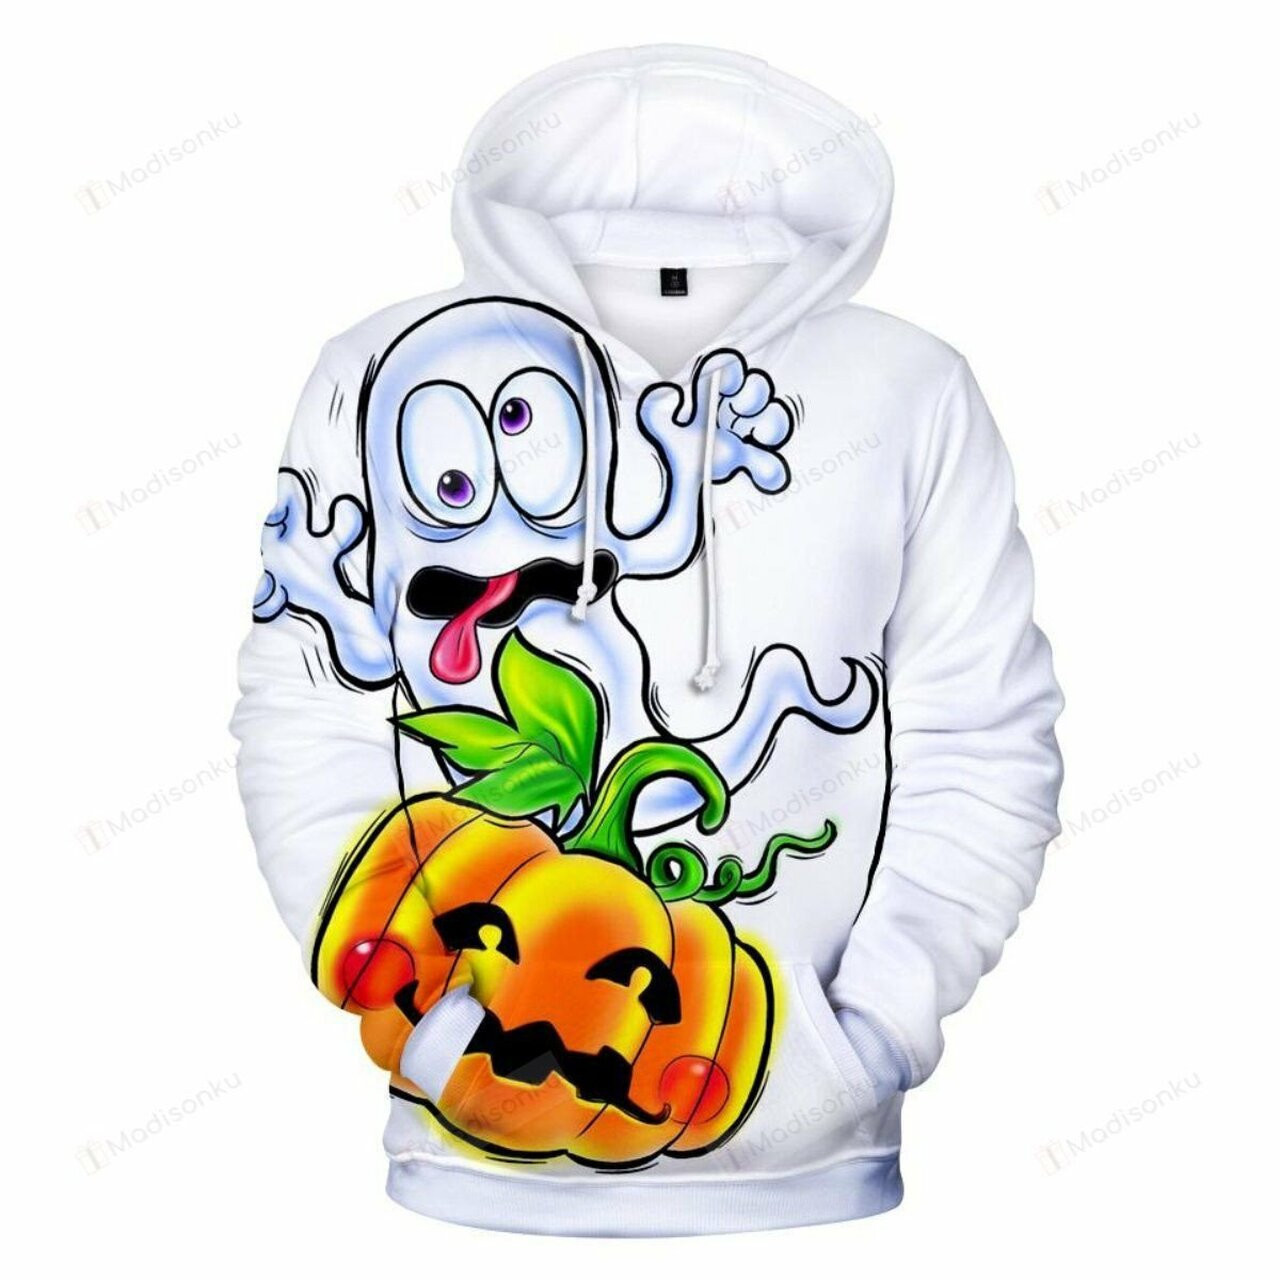 The Crazy Ghost 3d All Over Print Hoodie